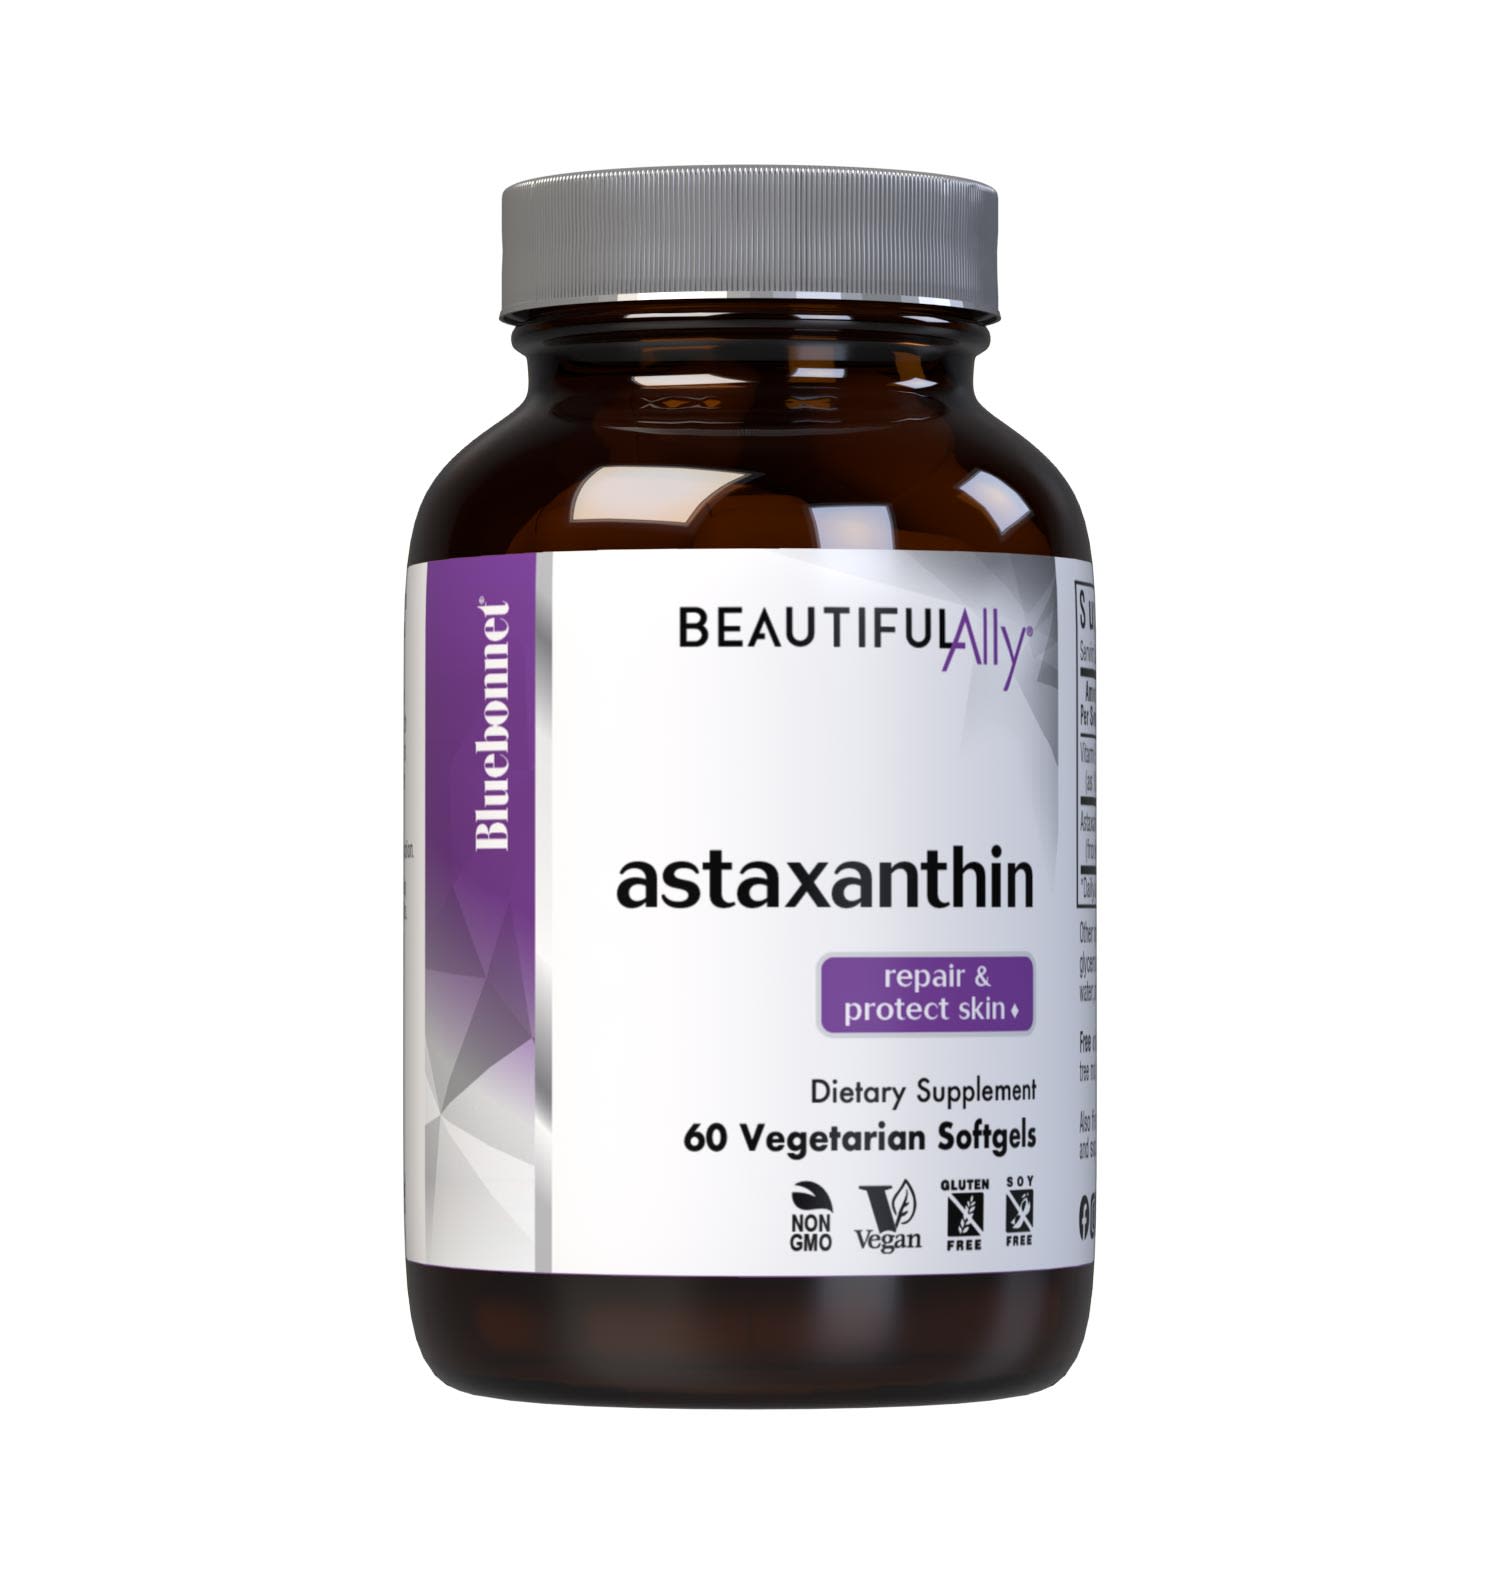 Bluebonnet’s Beautiful Ally Astaxanthin 60 Vegetarian Softgels are specially formulated to help repair and protect the skin from UV-induced oxidative stress that contributes to skin damage and aging with a vegan-based astaxanthin sustainably-sourced from marine algae. #size_60 count